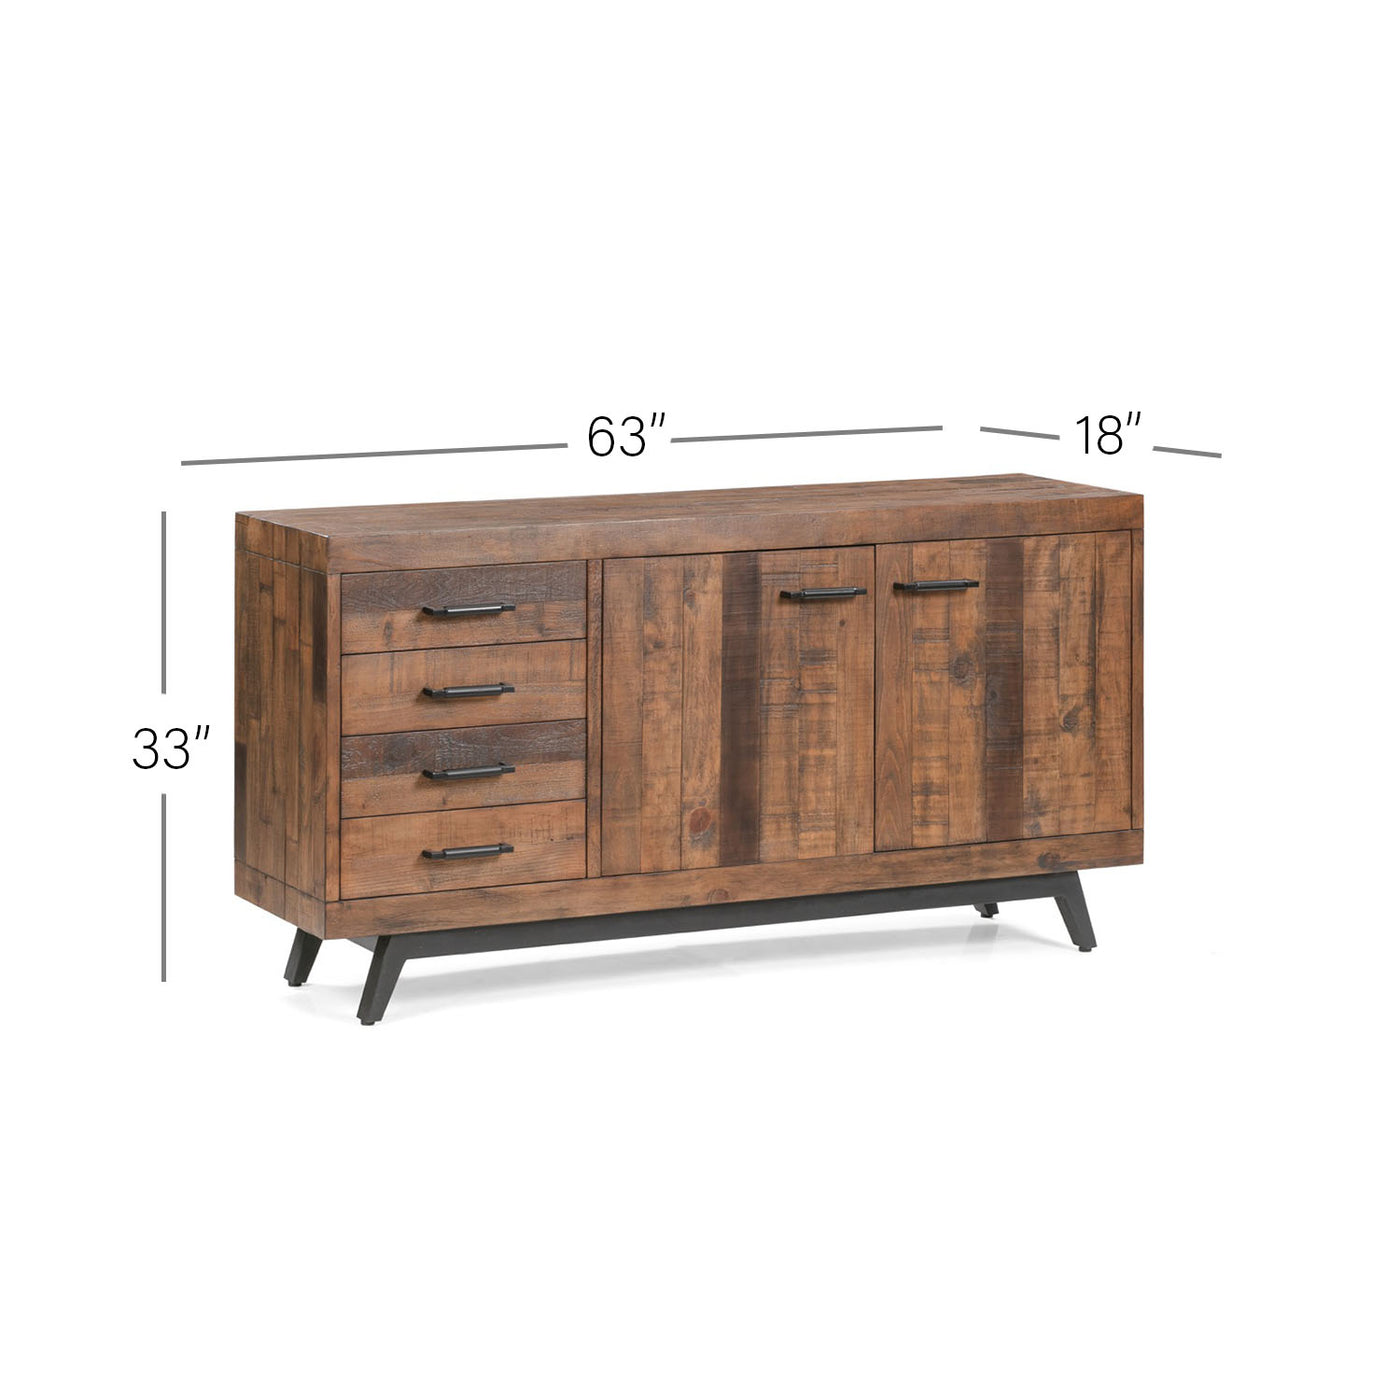 Dixon 4-Drawer Dining Room Buffet in Natural Finish